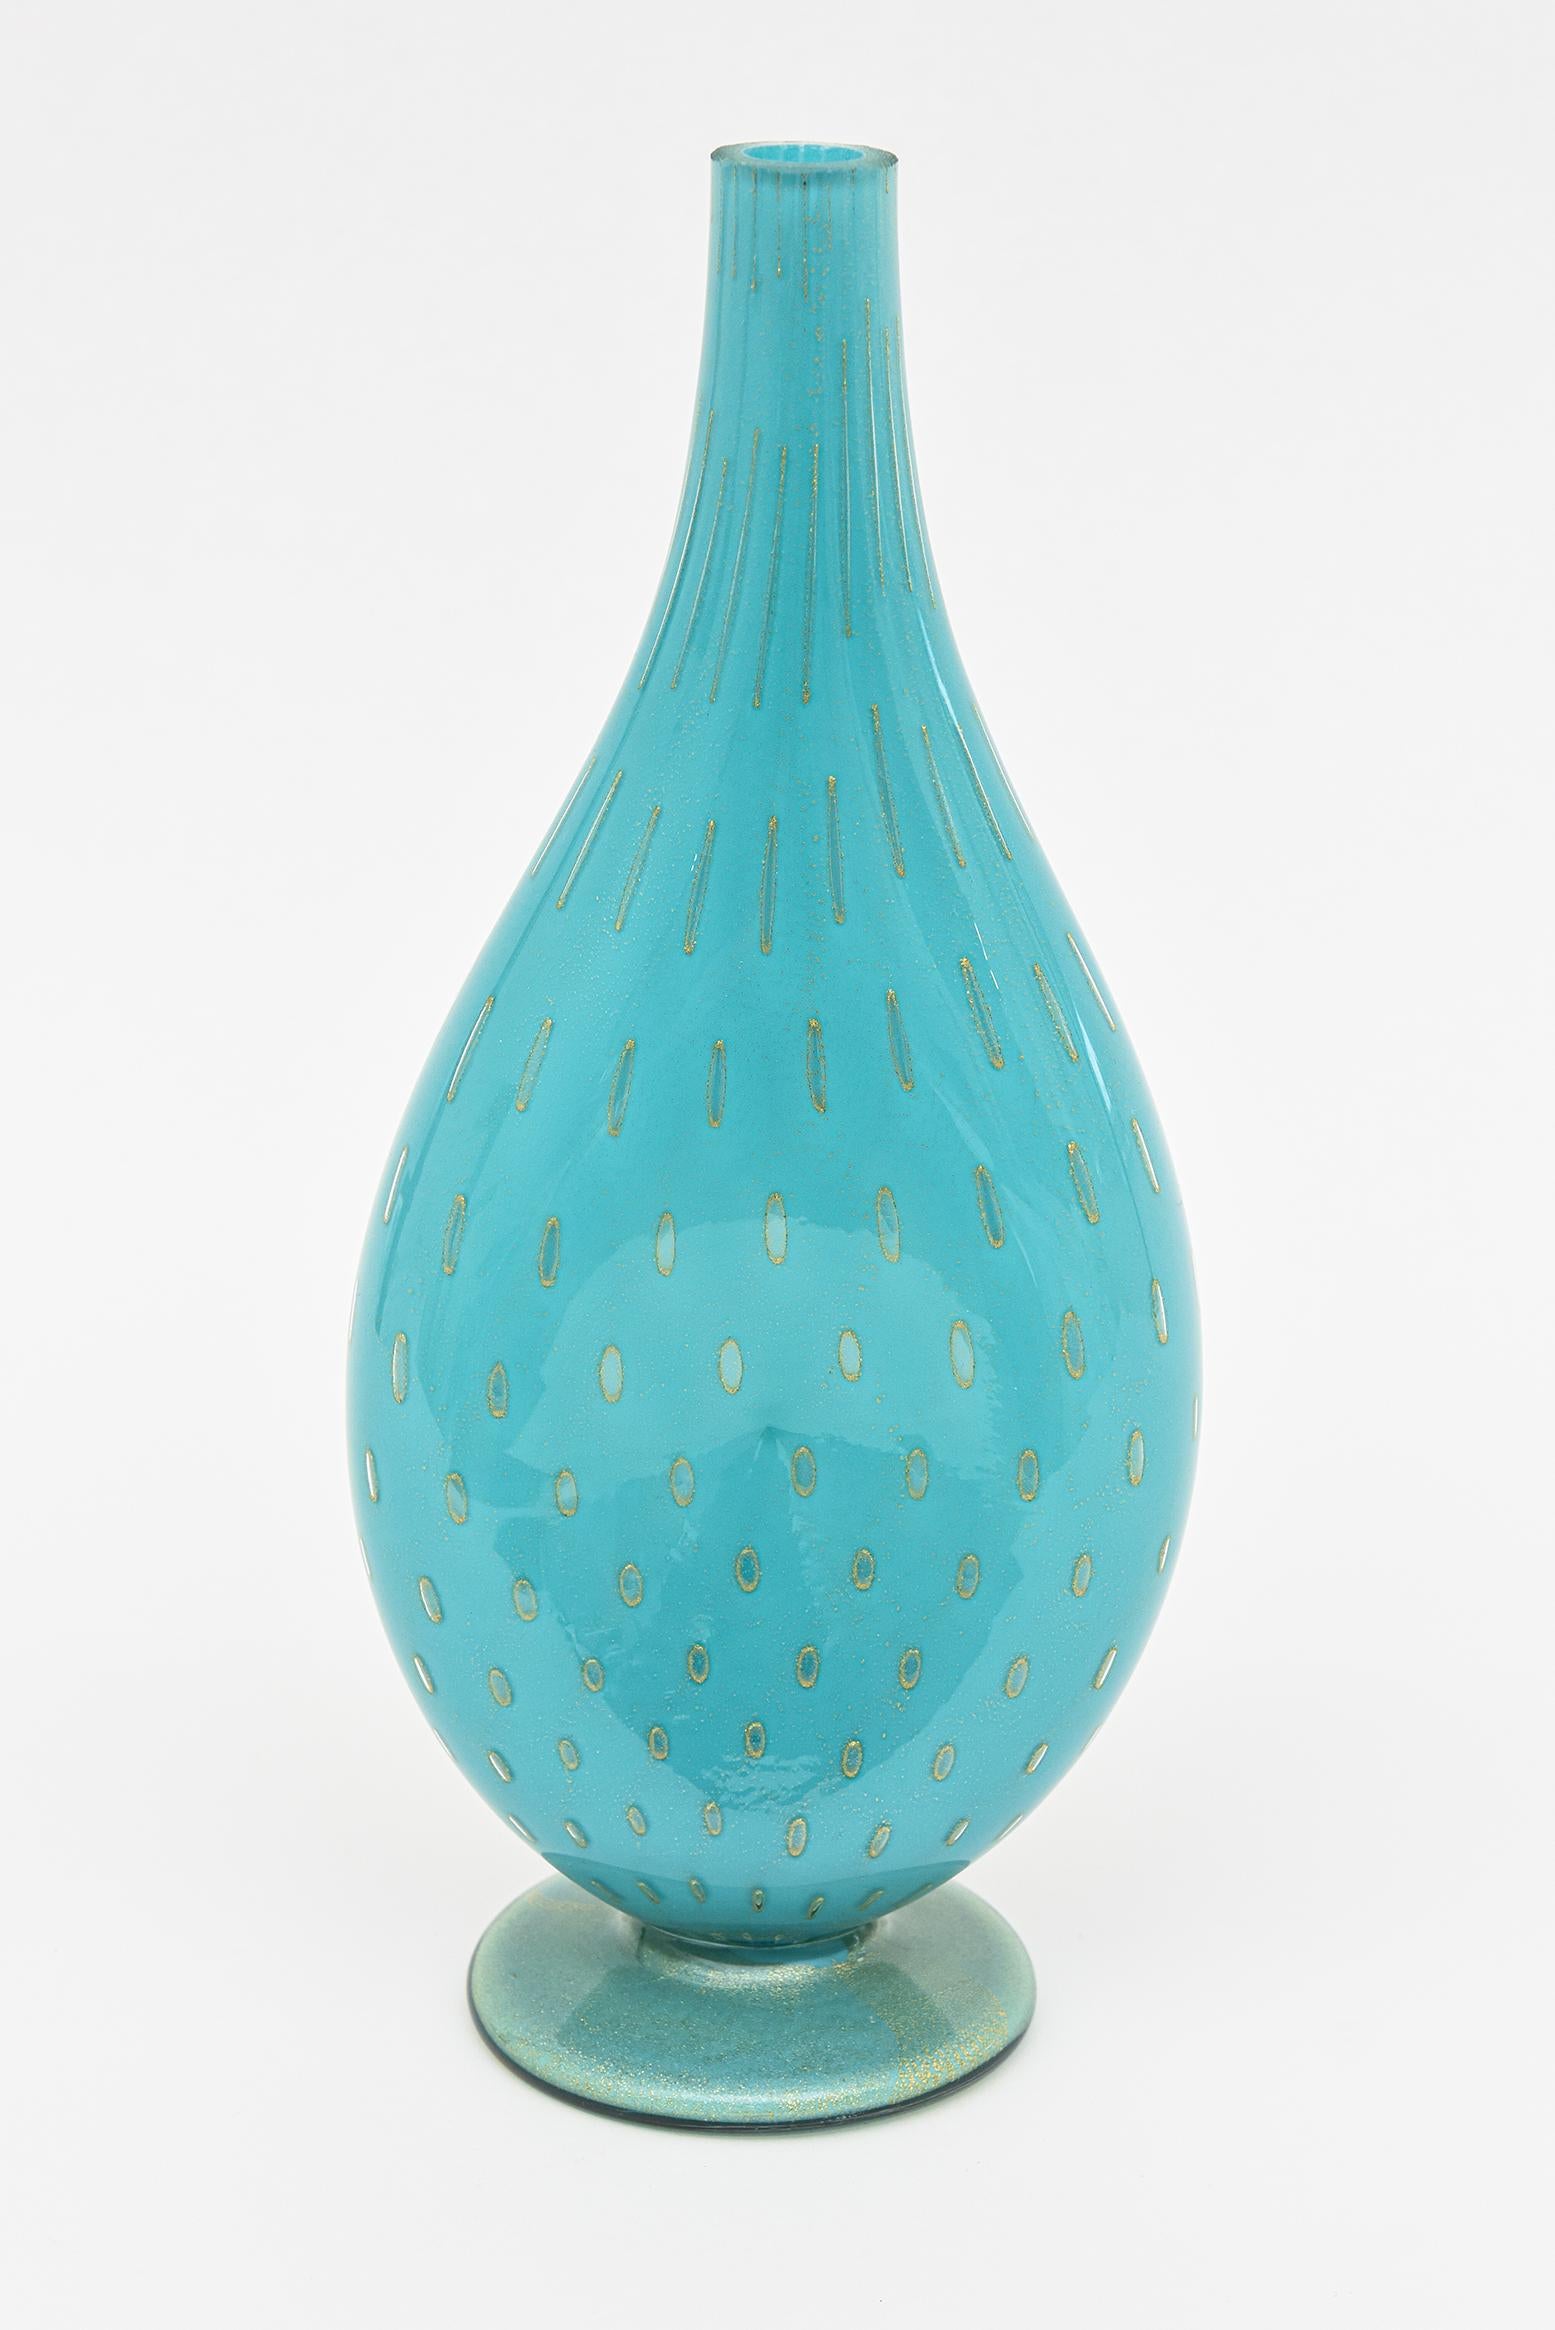 Vintage Barovier e Toso Murano Turquoise Glass Vessel Bottle With Gold Droplets For Sale 2